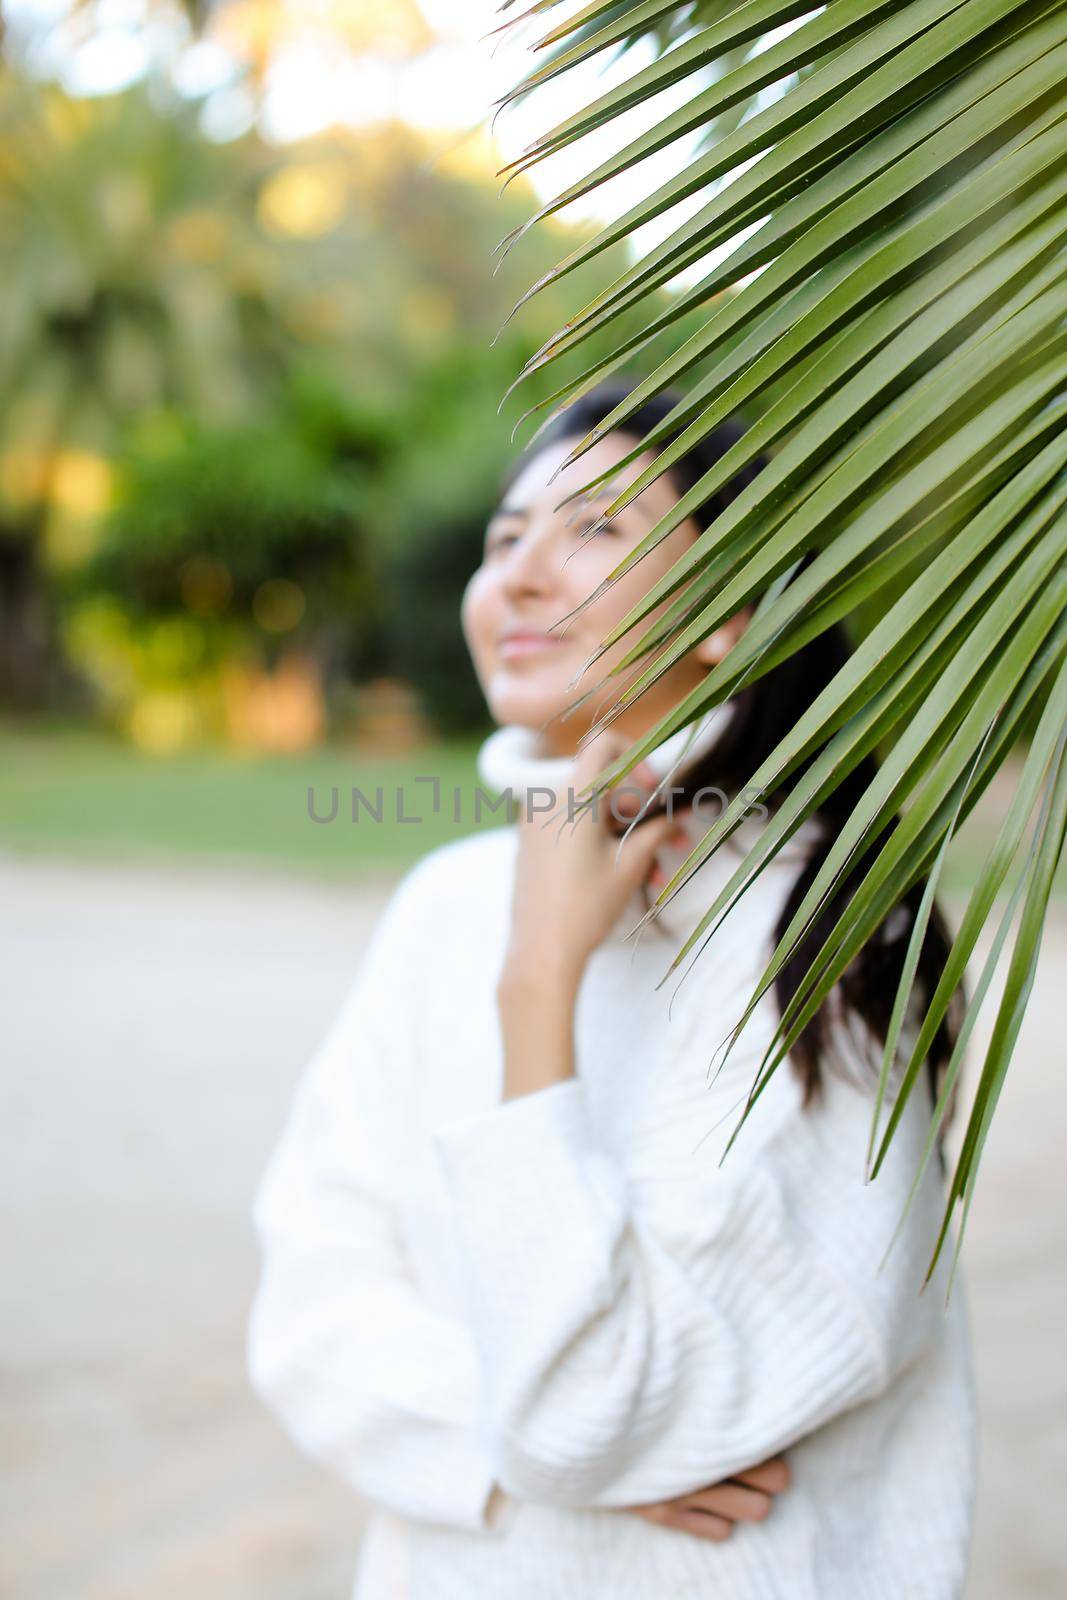 Focus on palm leaf, chinese woman wearing white sweater standing on beach. Concept of asian beauty and tropical nature.